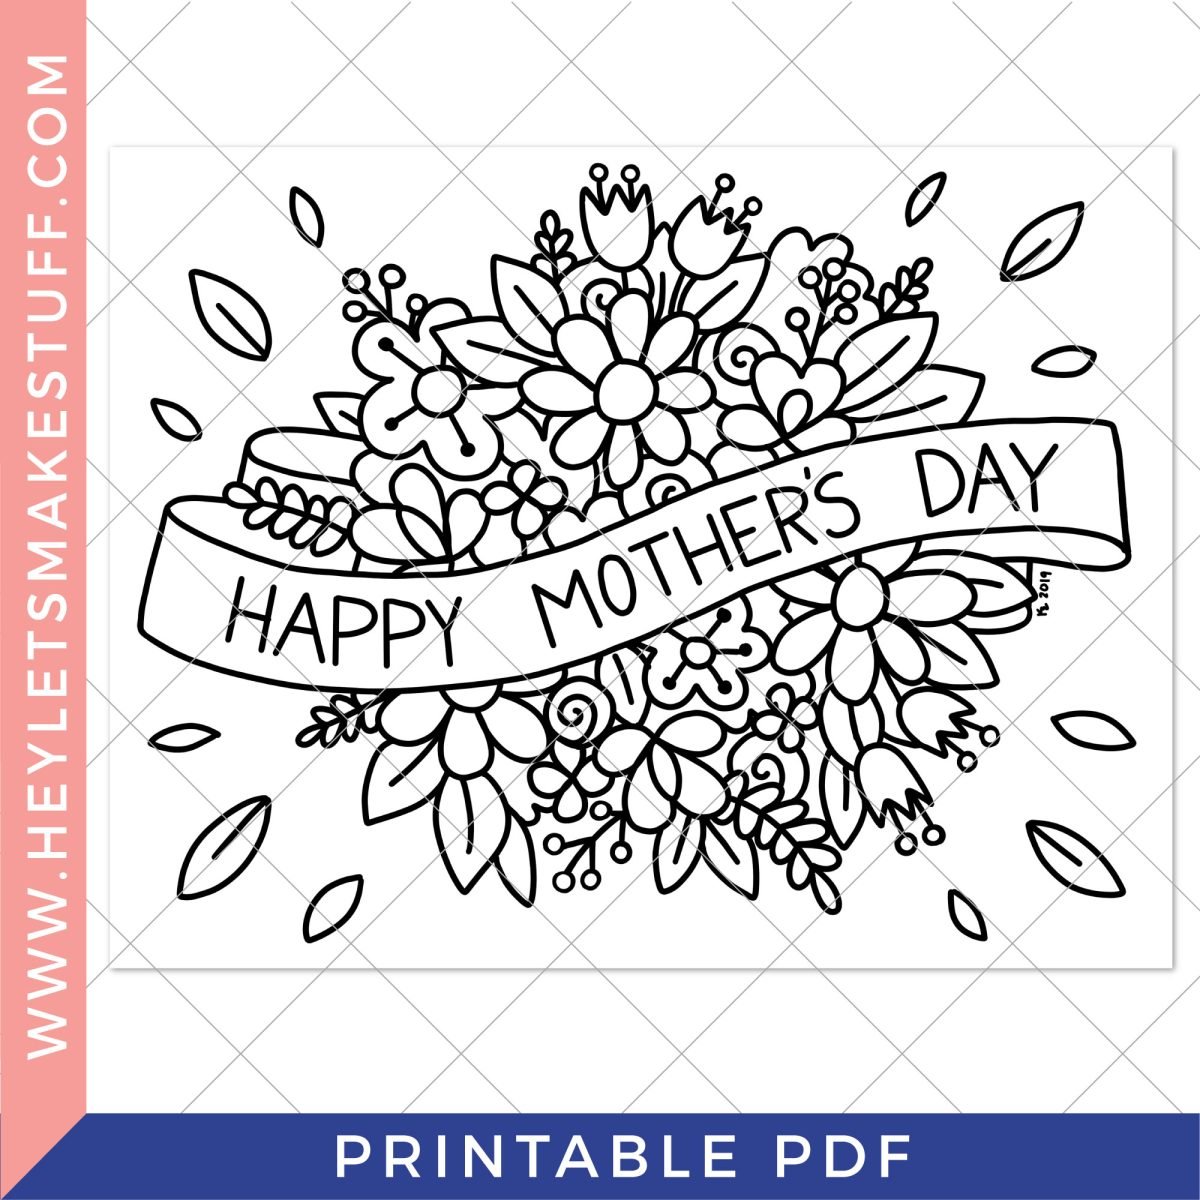 Mother's Day coloring page security image